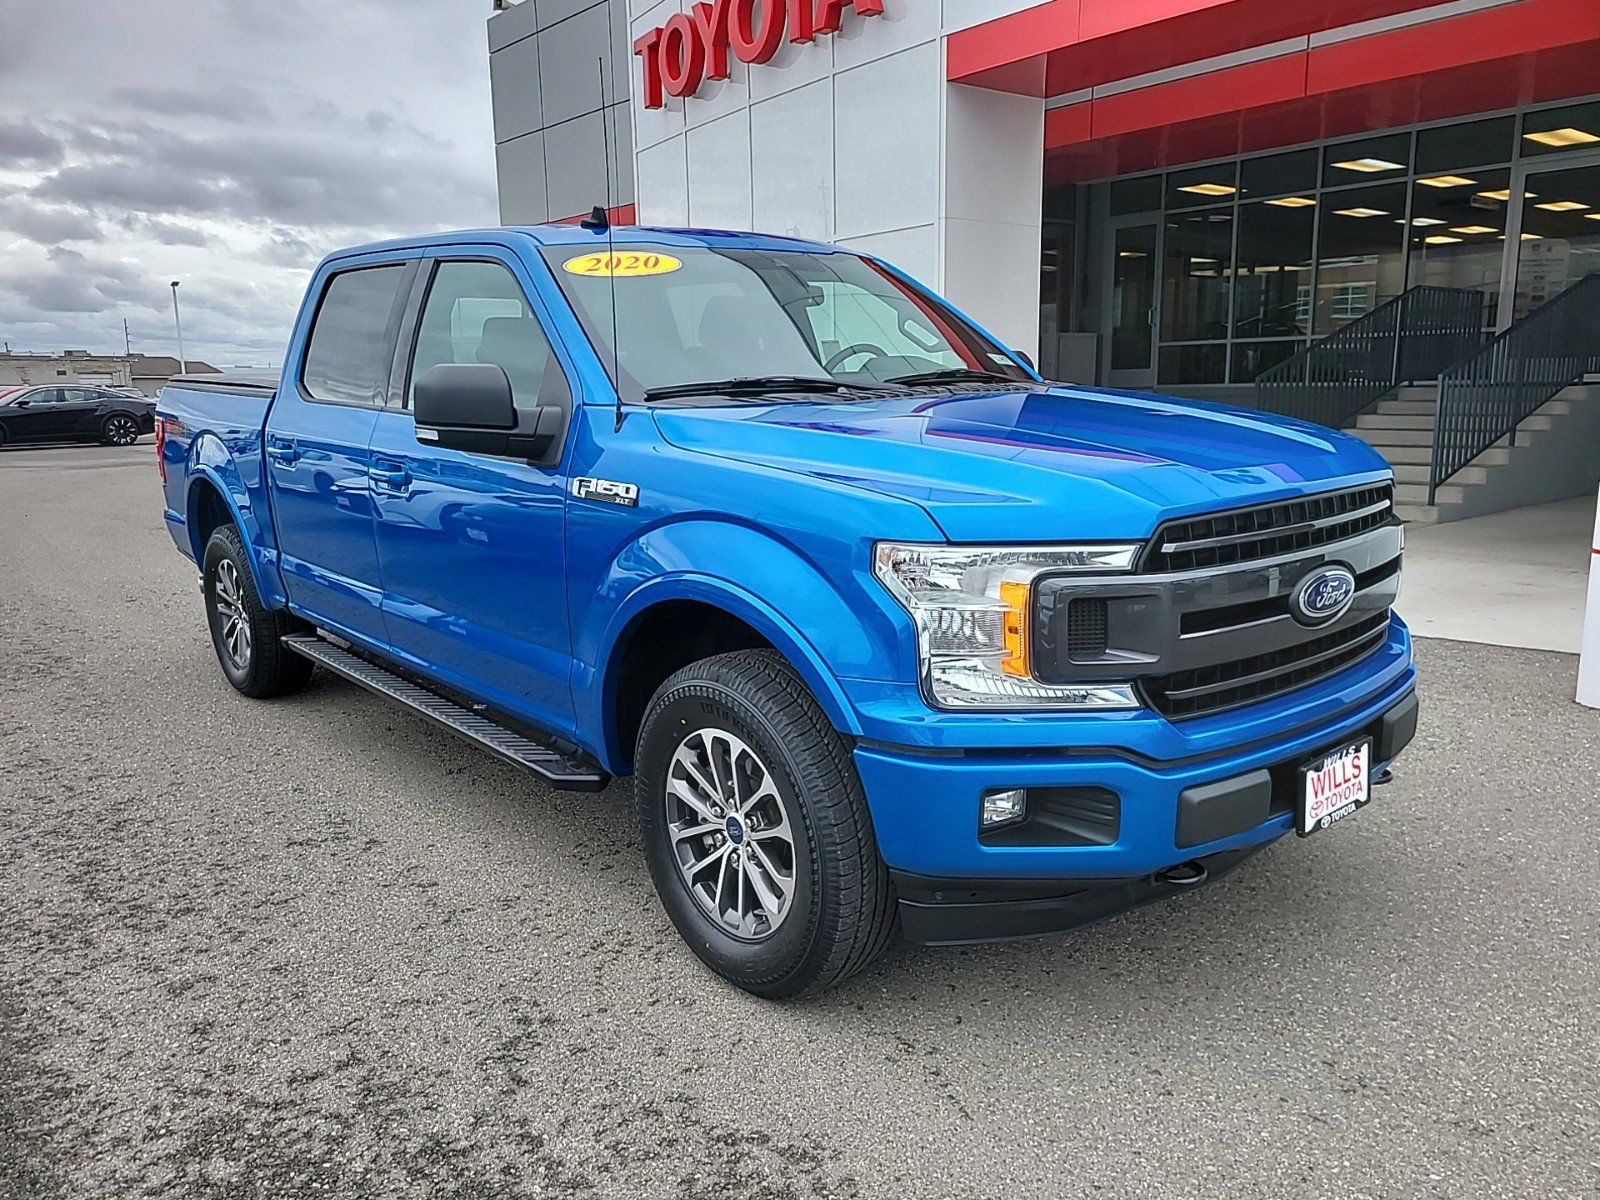 2020 - Ford - F-150 - $37,988